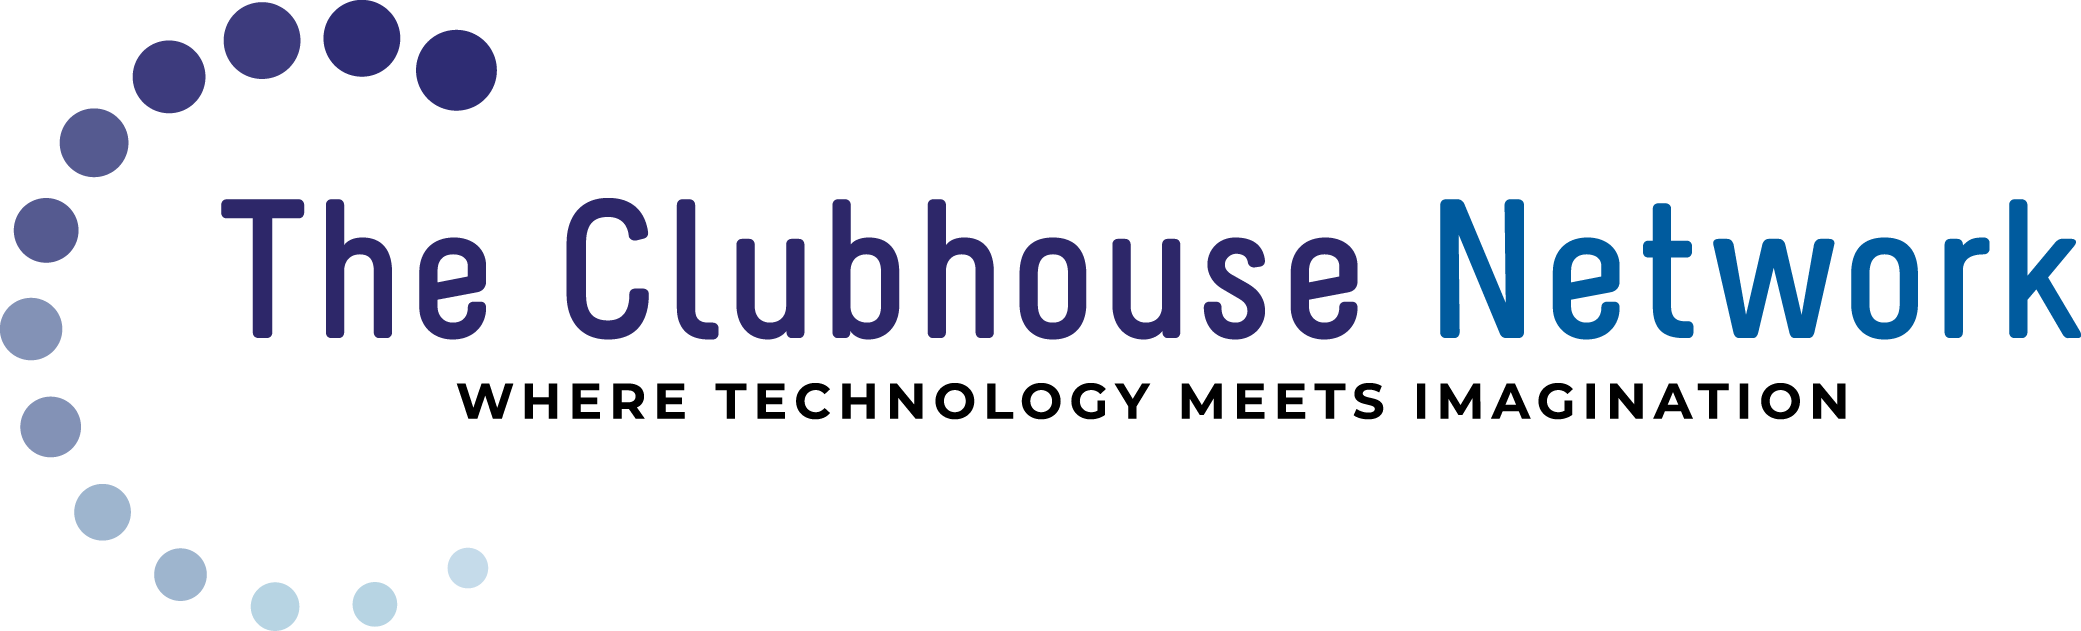 New Theclubhousenetwork Logo Rgb Large